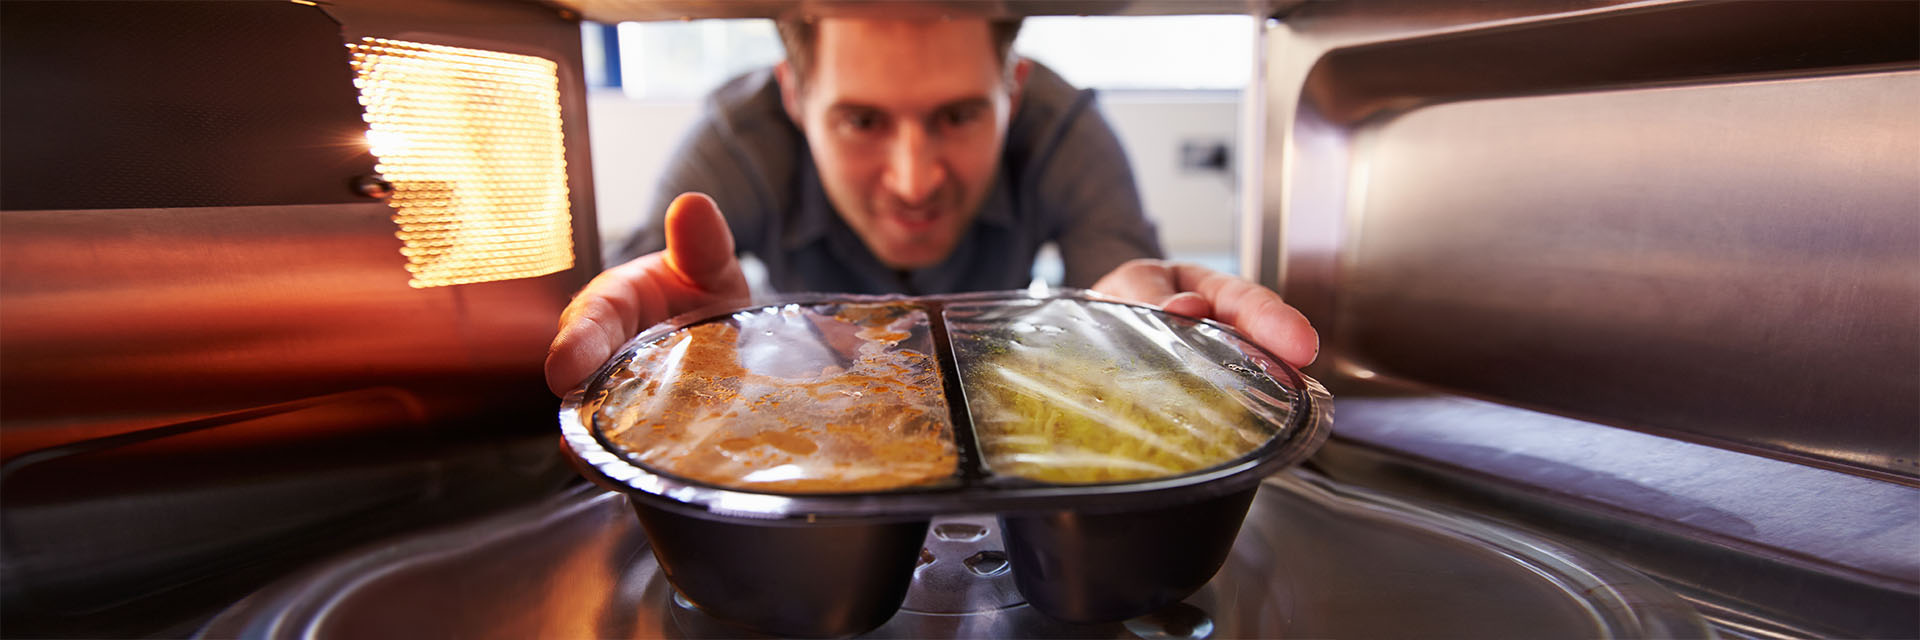 Man putting TV dinner into microwave